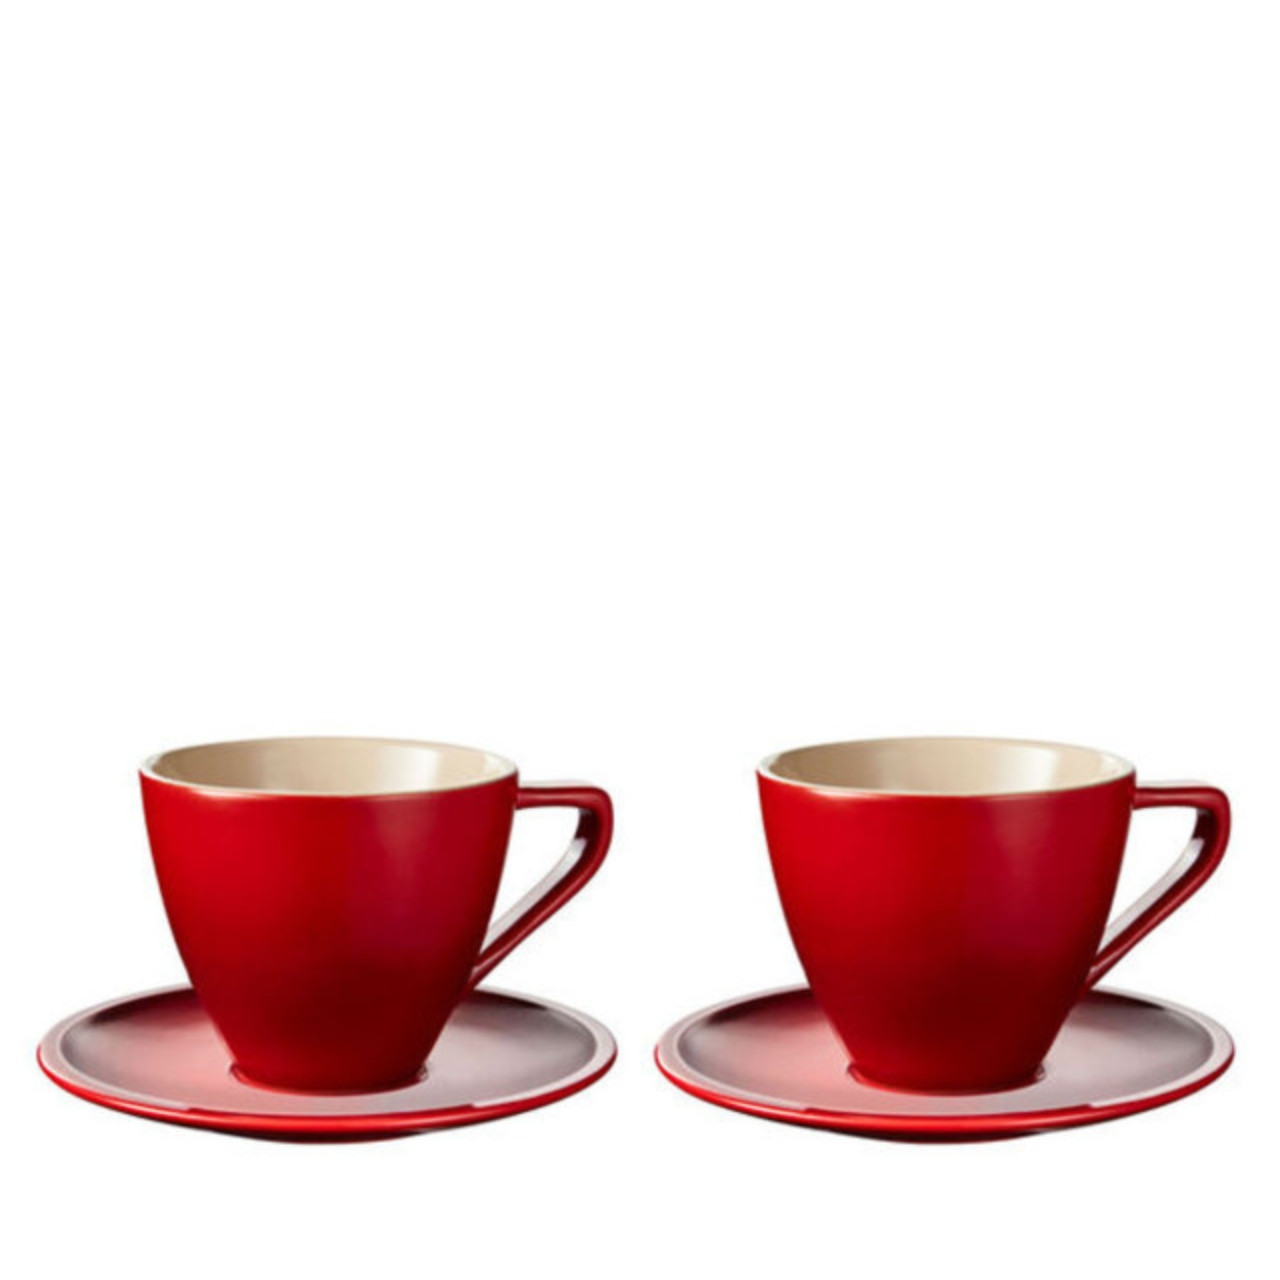 Le Creuset Tea Cups Set of 2, Vintage Cups and Saucers, Marked 